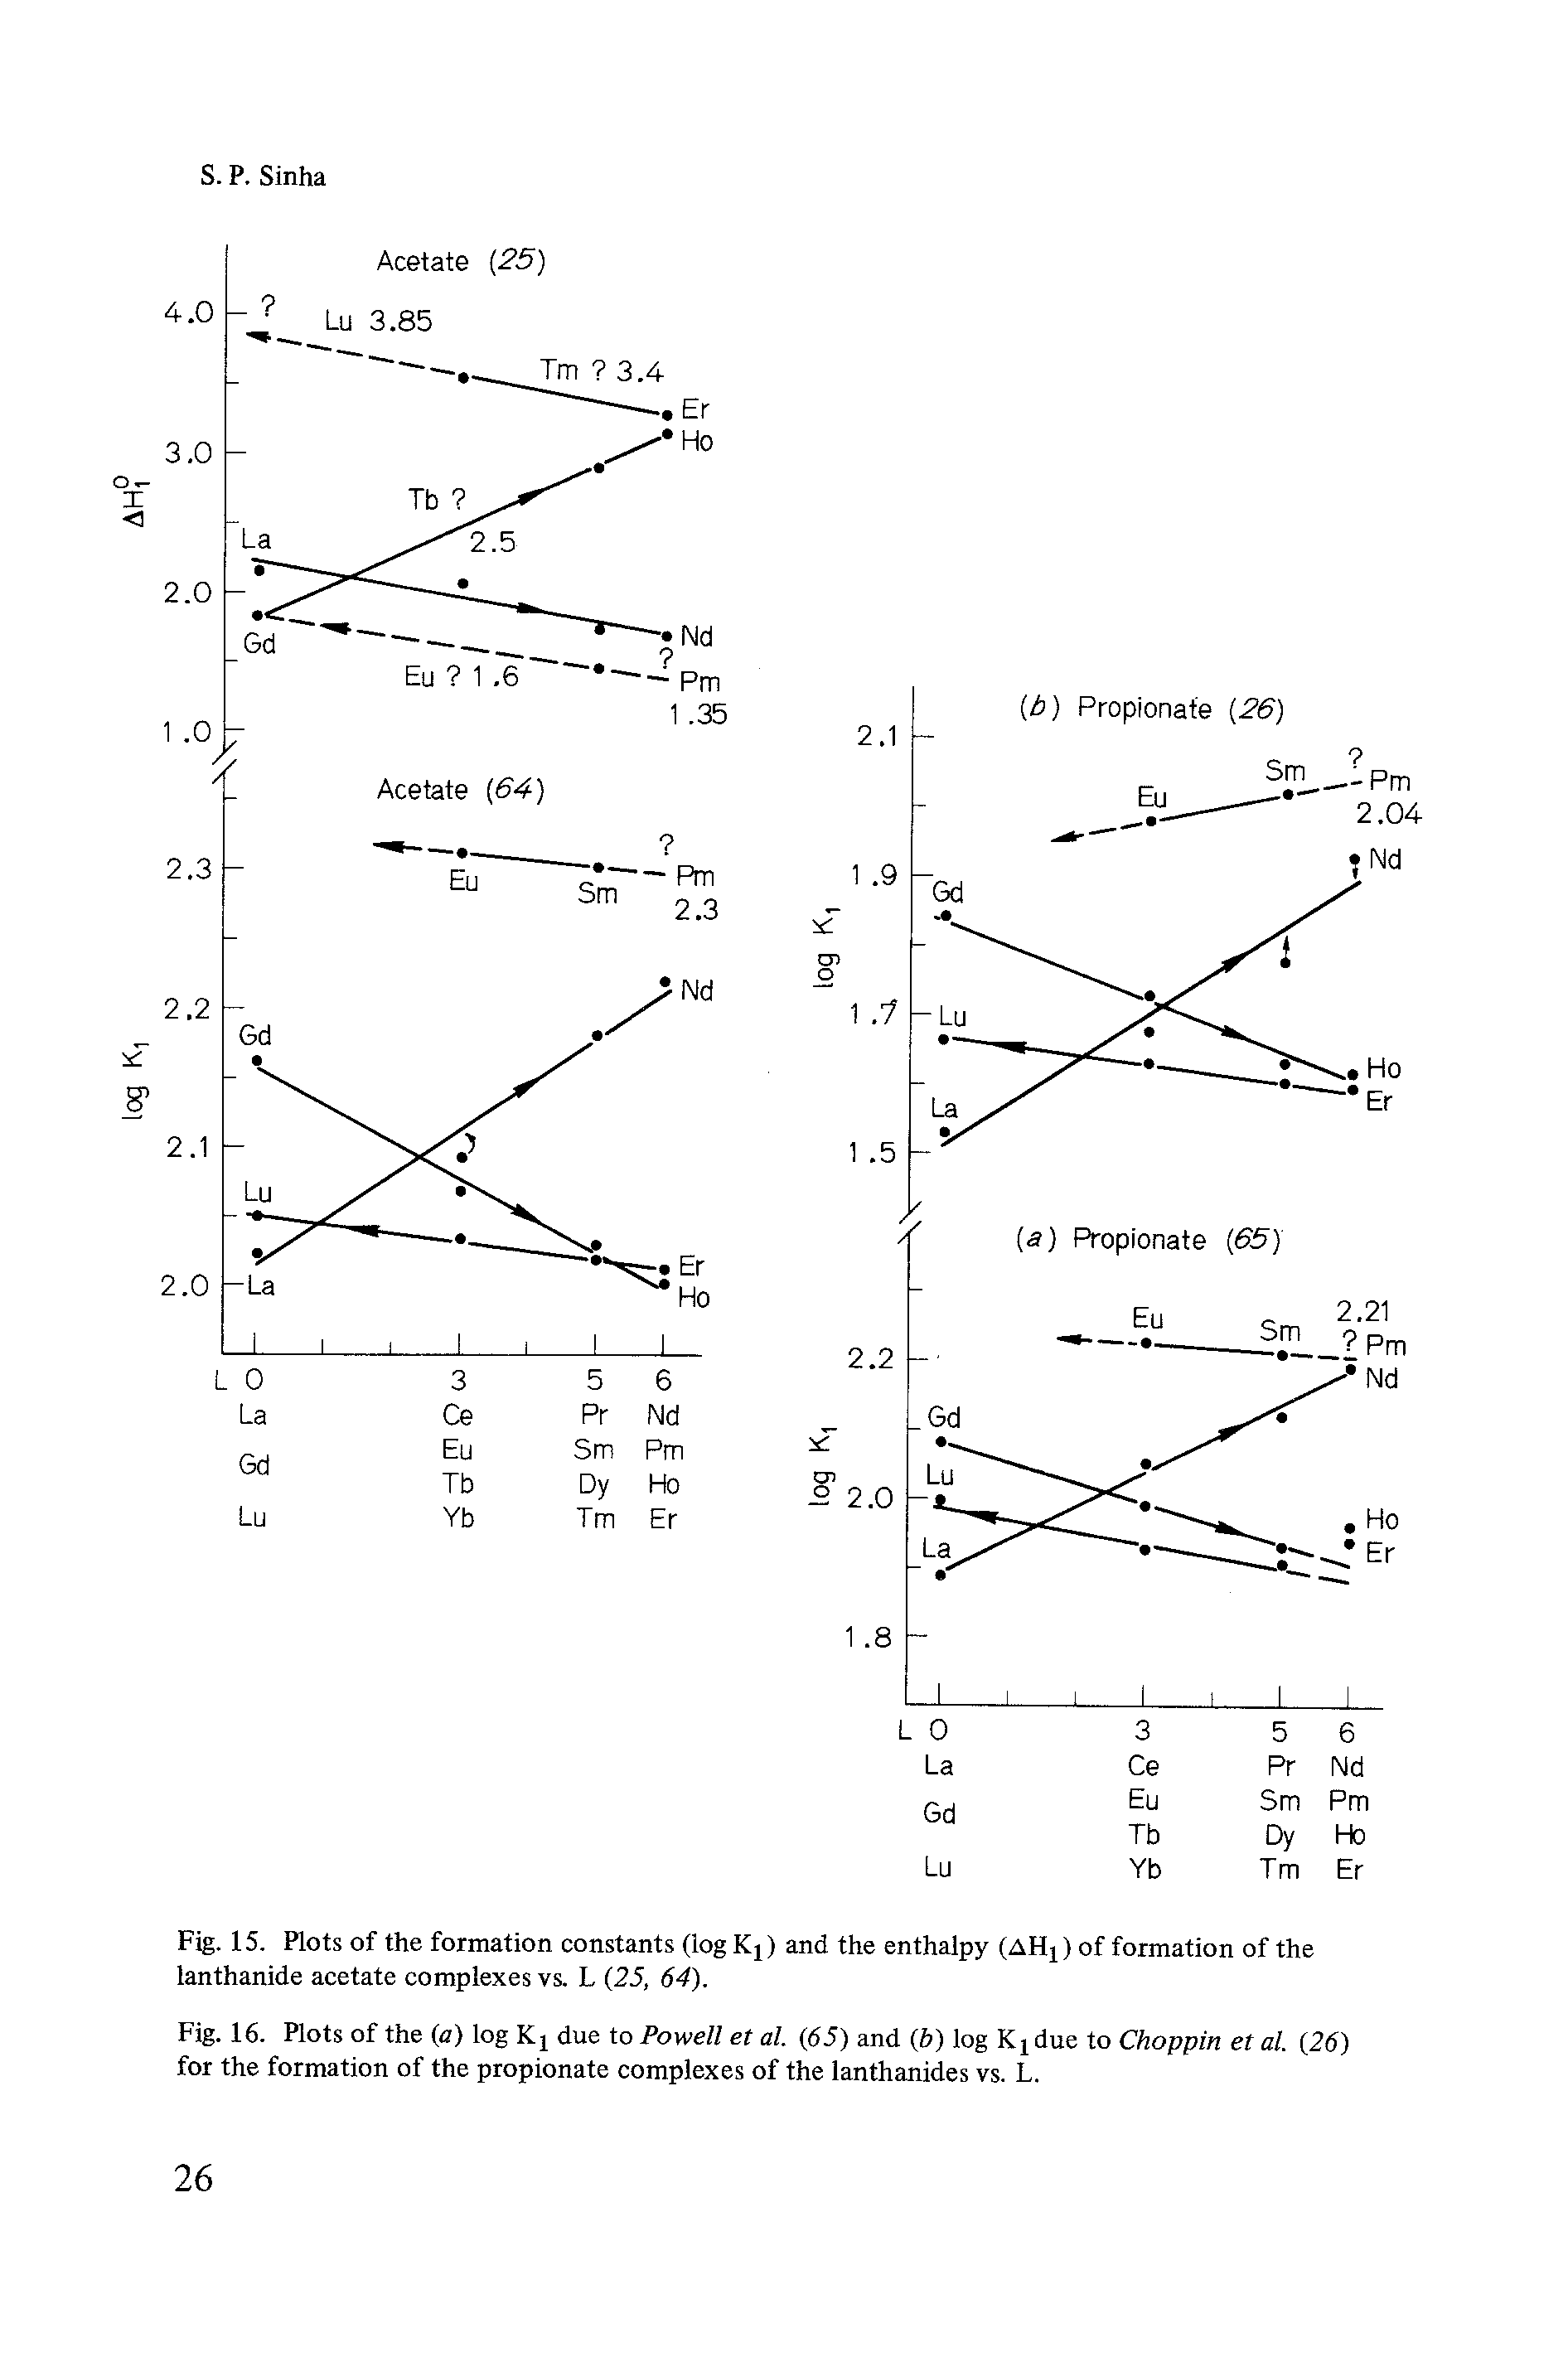 Fig. 15. Plots of the formation constants (log Kj) and the enthalpy (AHj) of formation of the lanthanide acetate complexes vs. L (25, 64).